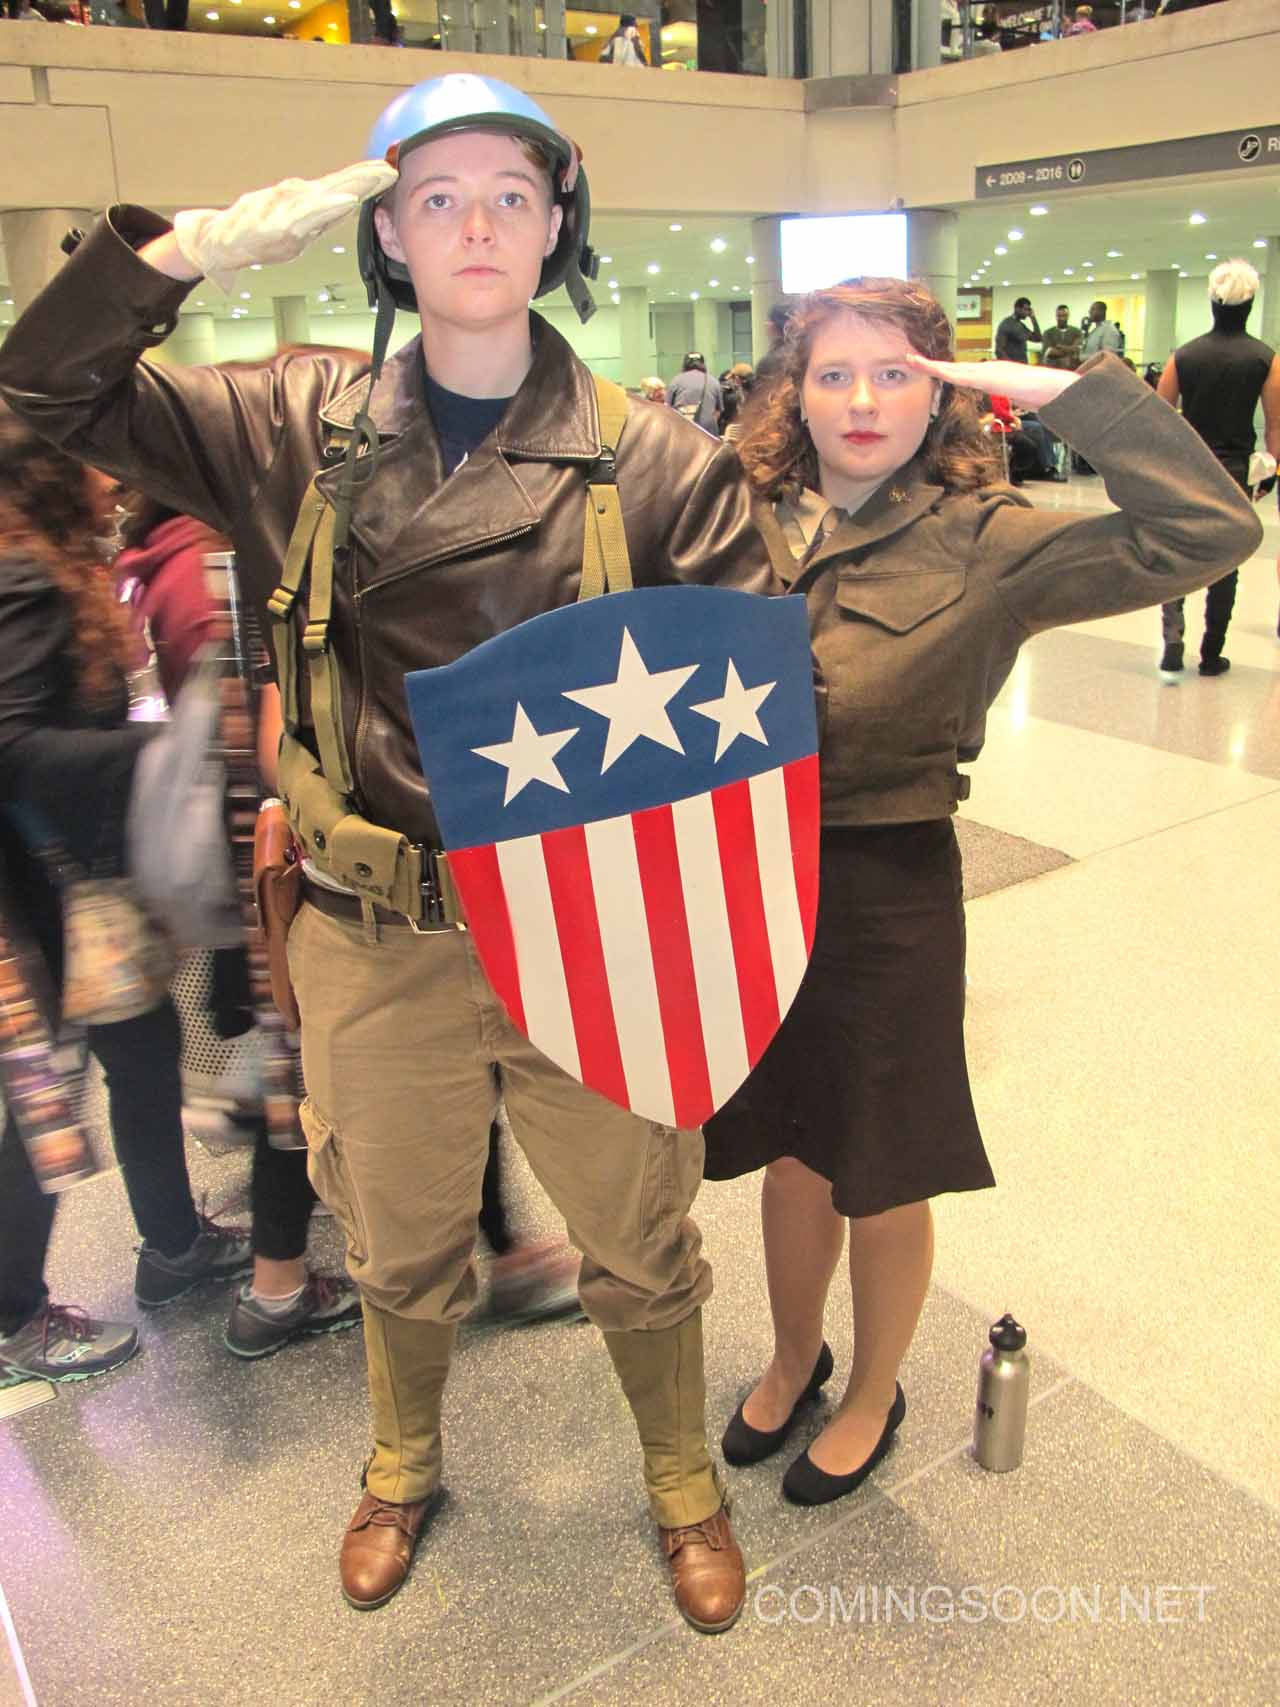 New Cosplay Photos from Day 2 of the New York Comic Con - SuperHeroHype